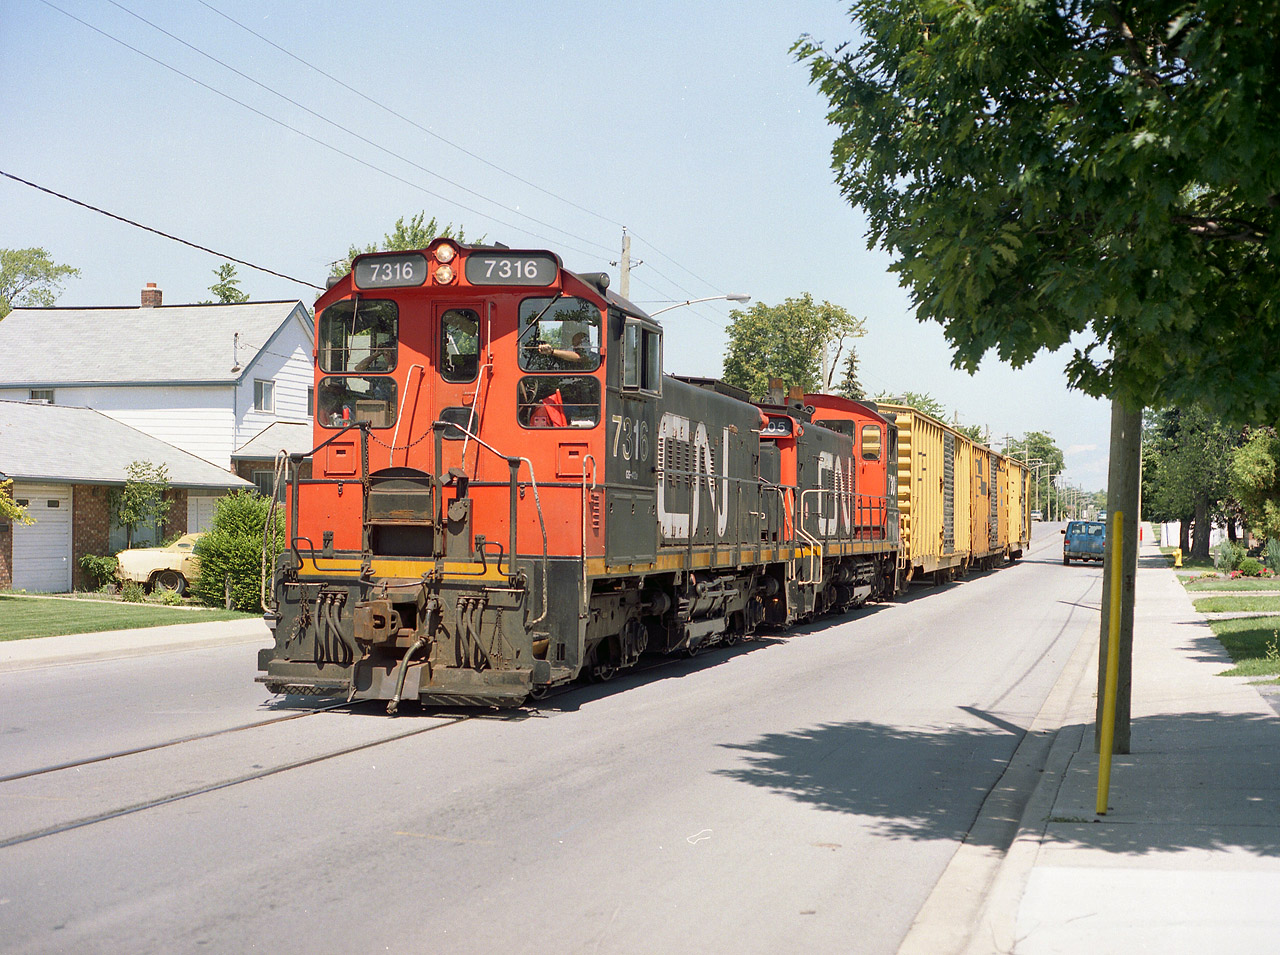 CN 7316 and 7305 trundle down the middle of Pine St in Thorold in August 1999 with what was apparently the last run to the Gallagher paper plant farther up the street near Albert Av. Three boxcars were retrieved from the plant, which had declared bankruptcy 2 months previously, and closed in August'99. The recycled paper operation was known as Noranda Forest, Inc until taken over by Mike Gallagher operations in 1997. The plant was offered for sale and speculation that it might return to operations under a new name never materialized. For me, this was the ultimate in luck to happen by at this time. So for the record, this trackage was never operated by the Port Colborne Harbour (Trillium), which was in the process of taking over St. Catharines area switching.